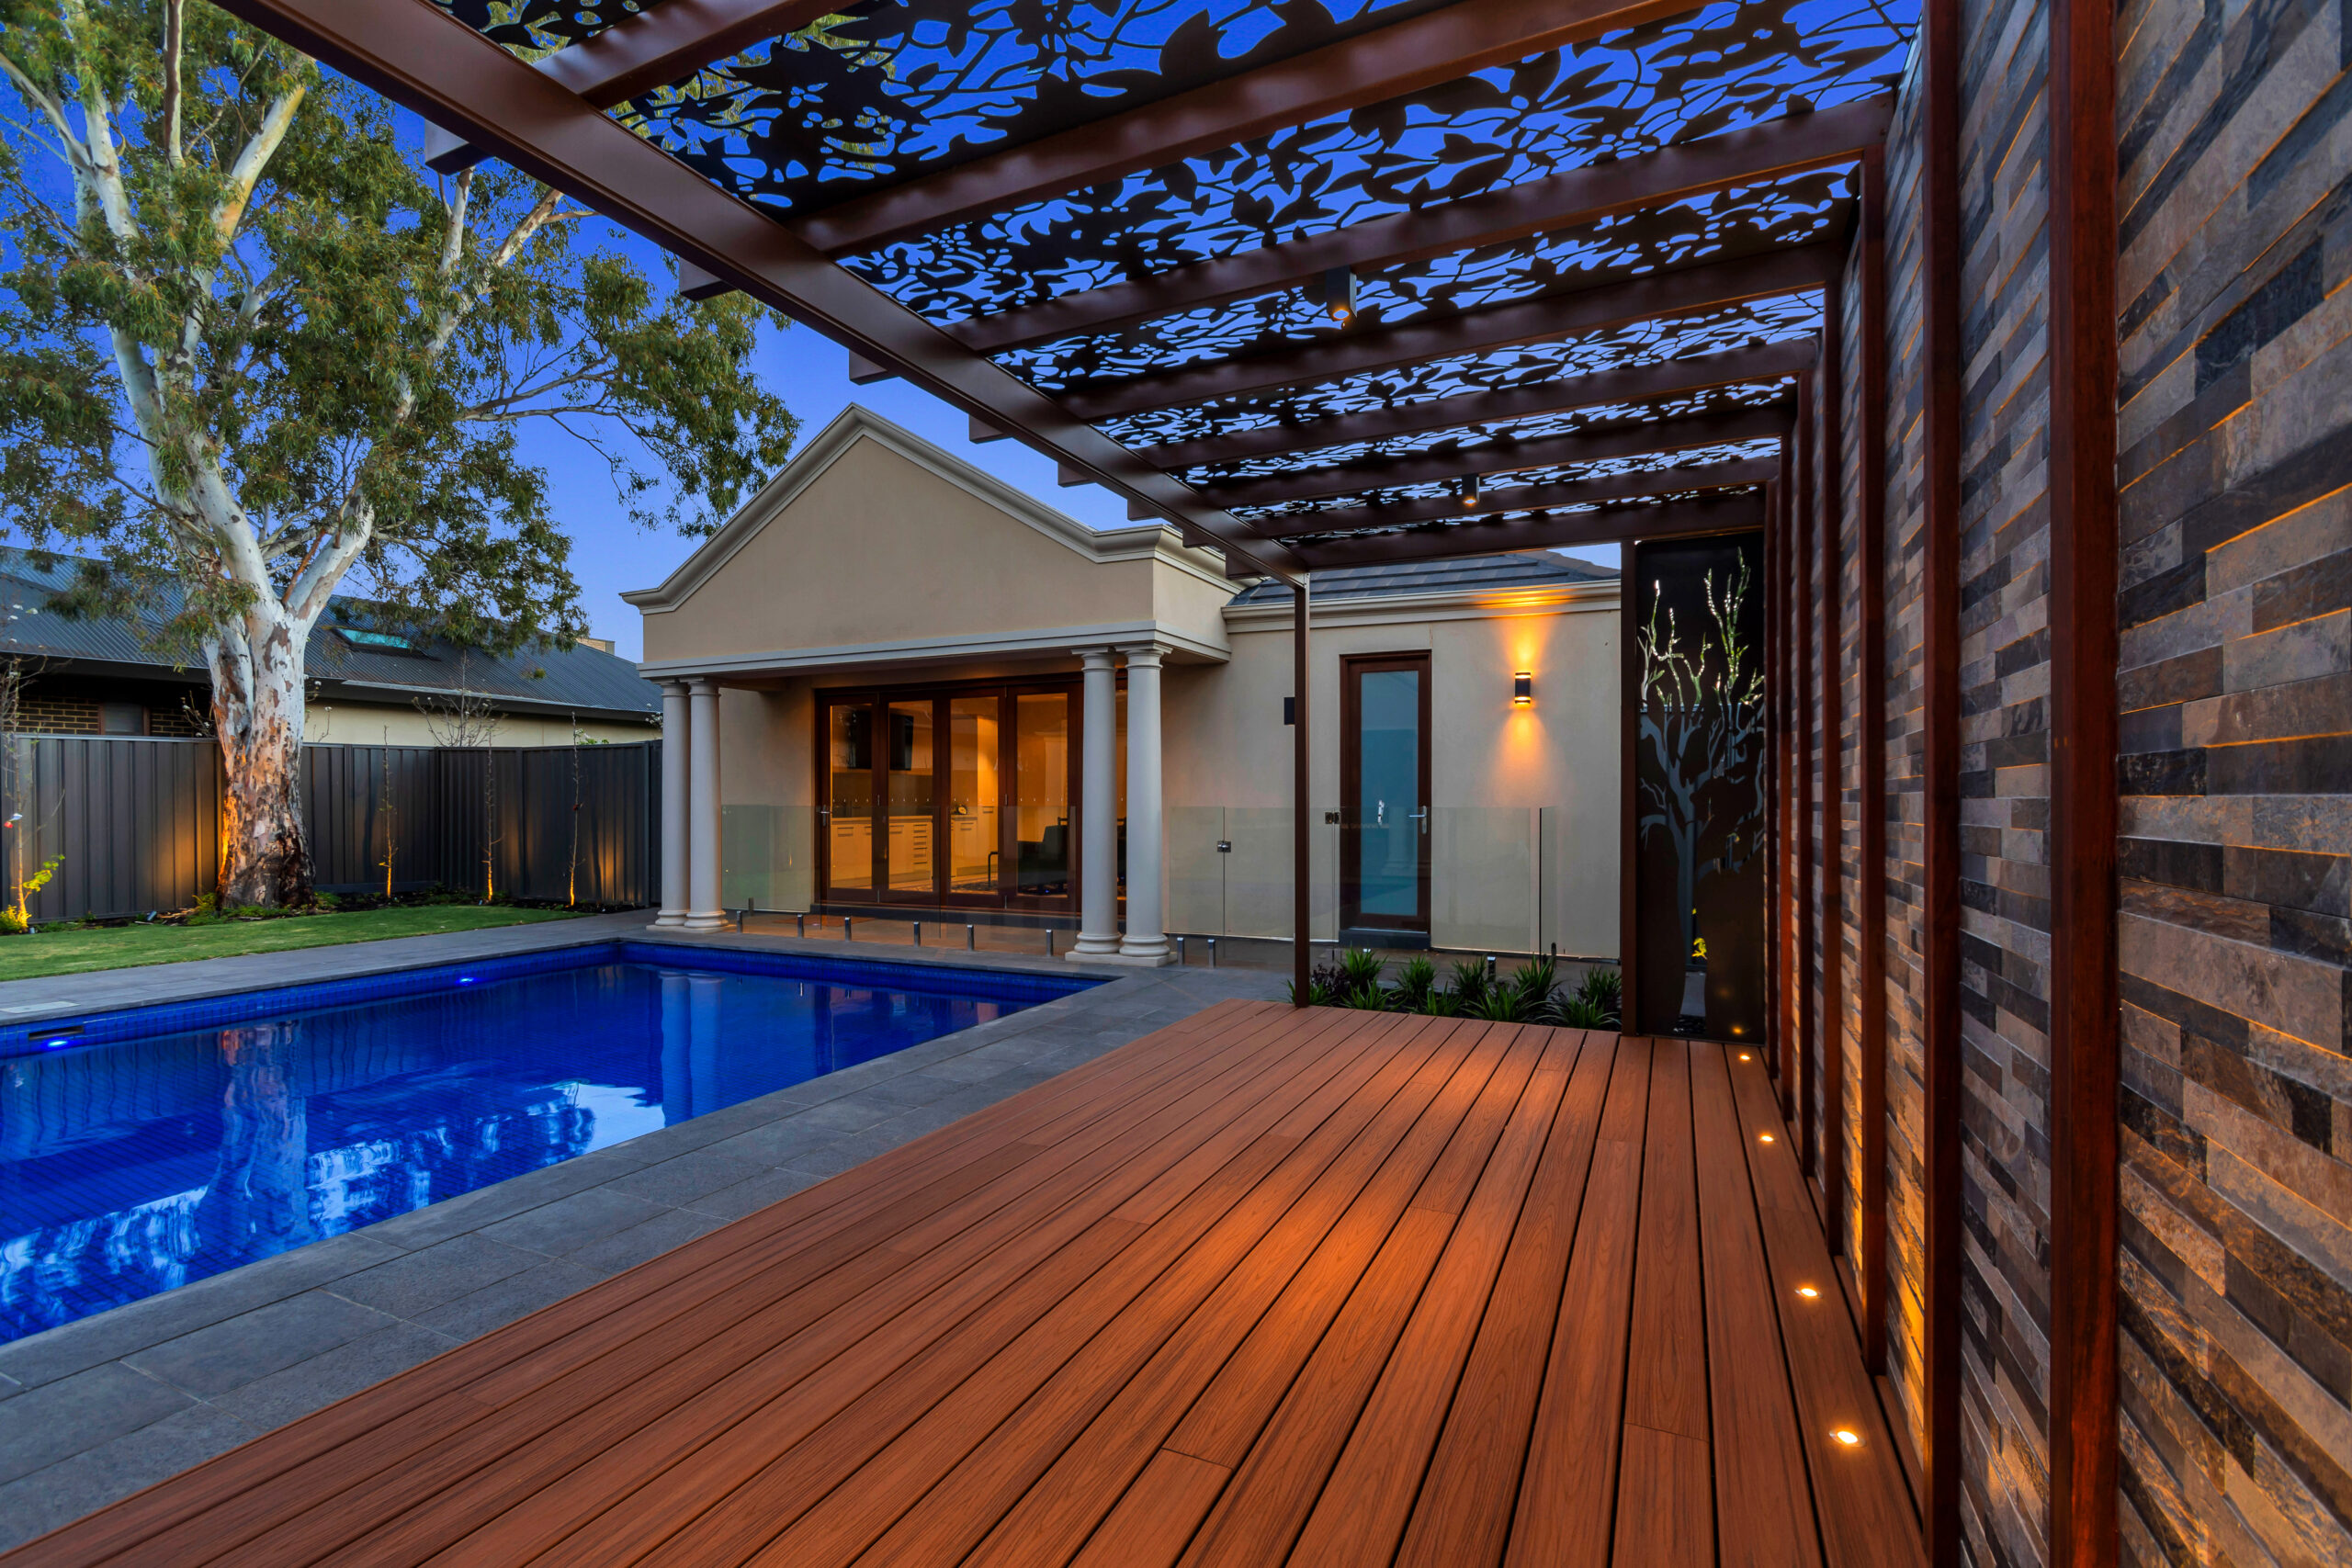 Beautiful decking by the pool in the evening